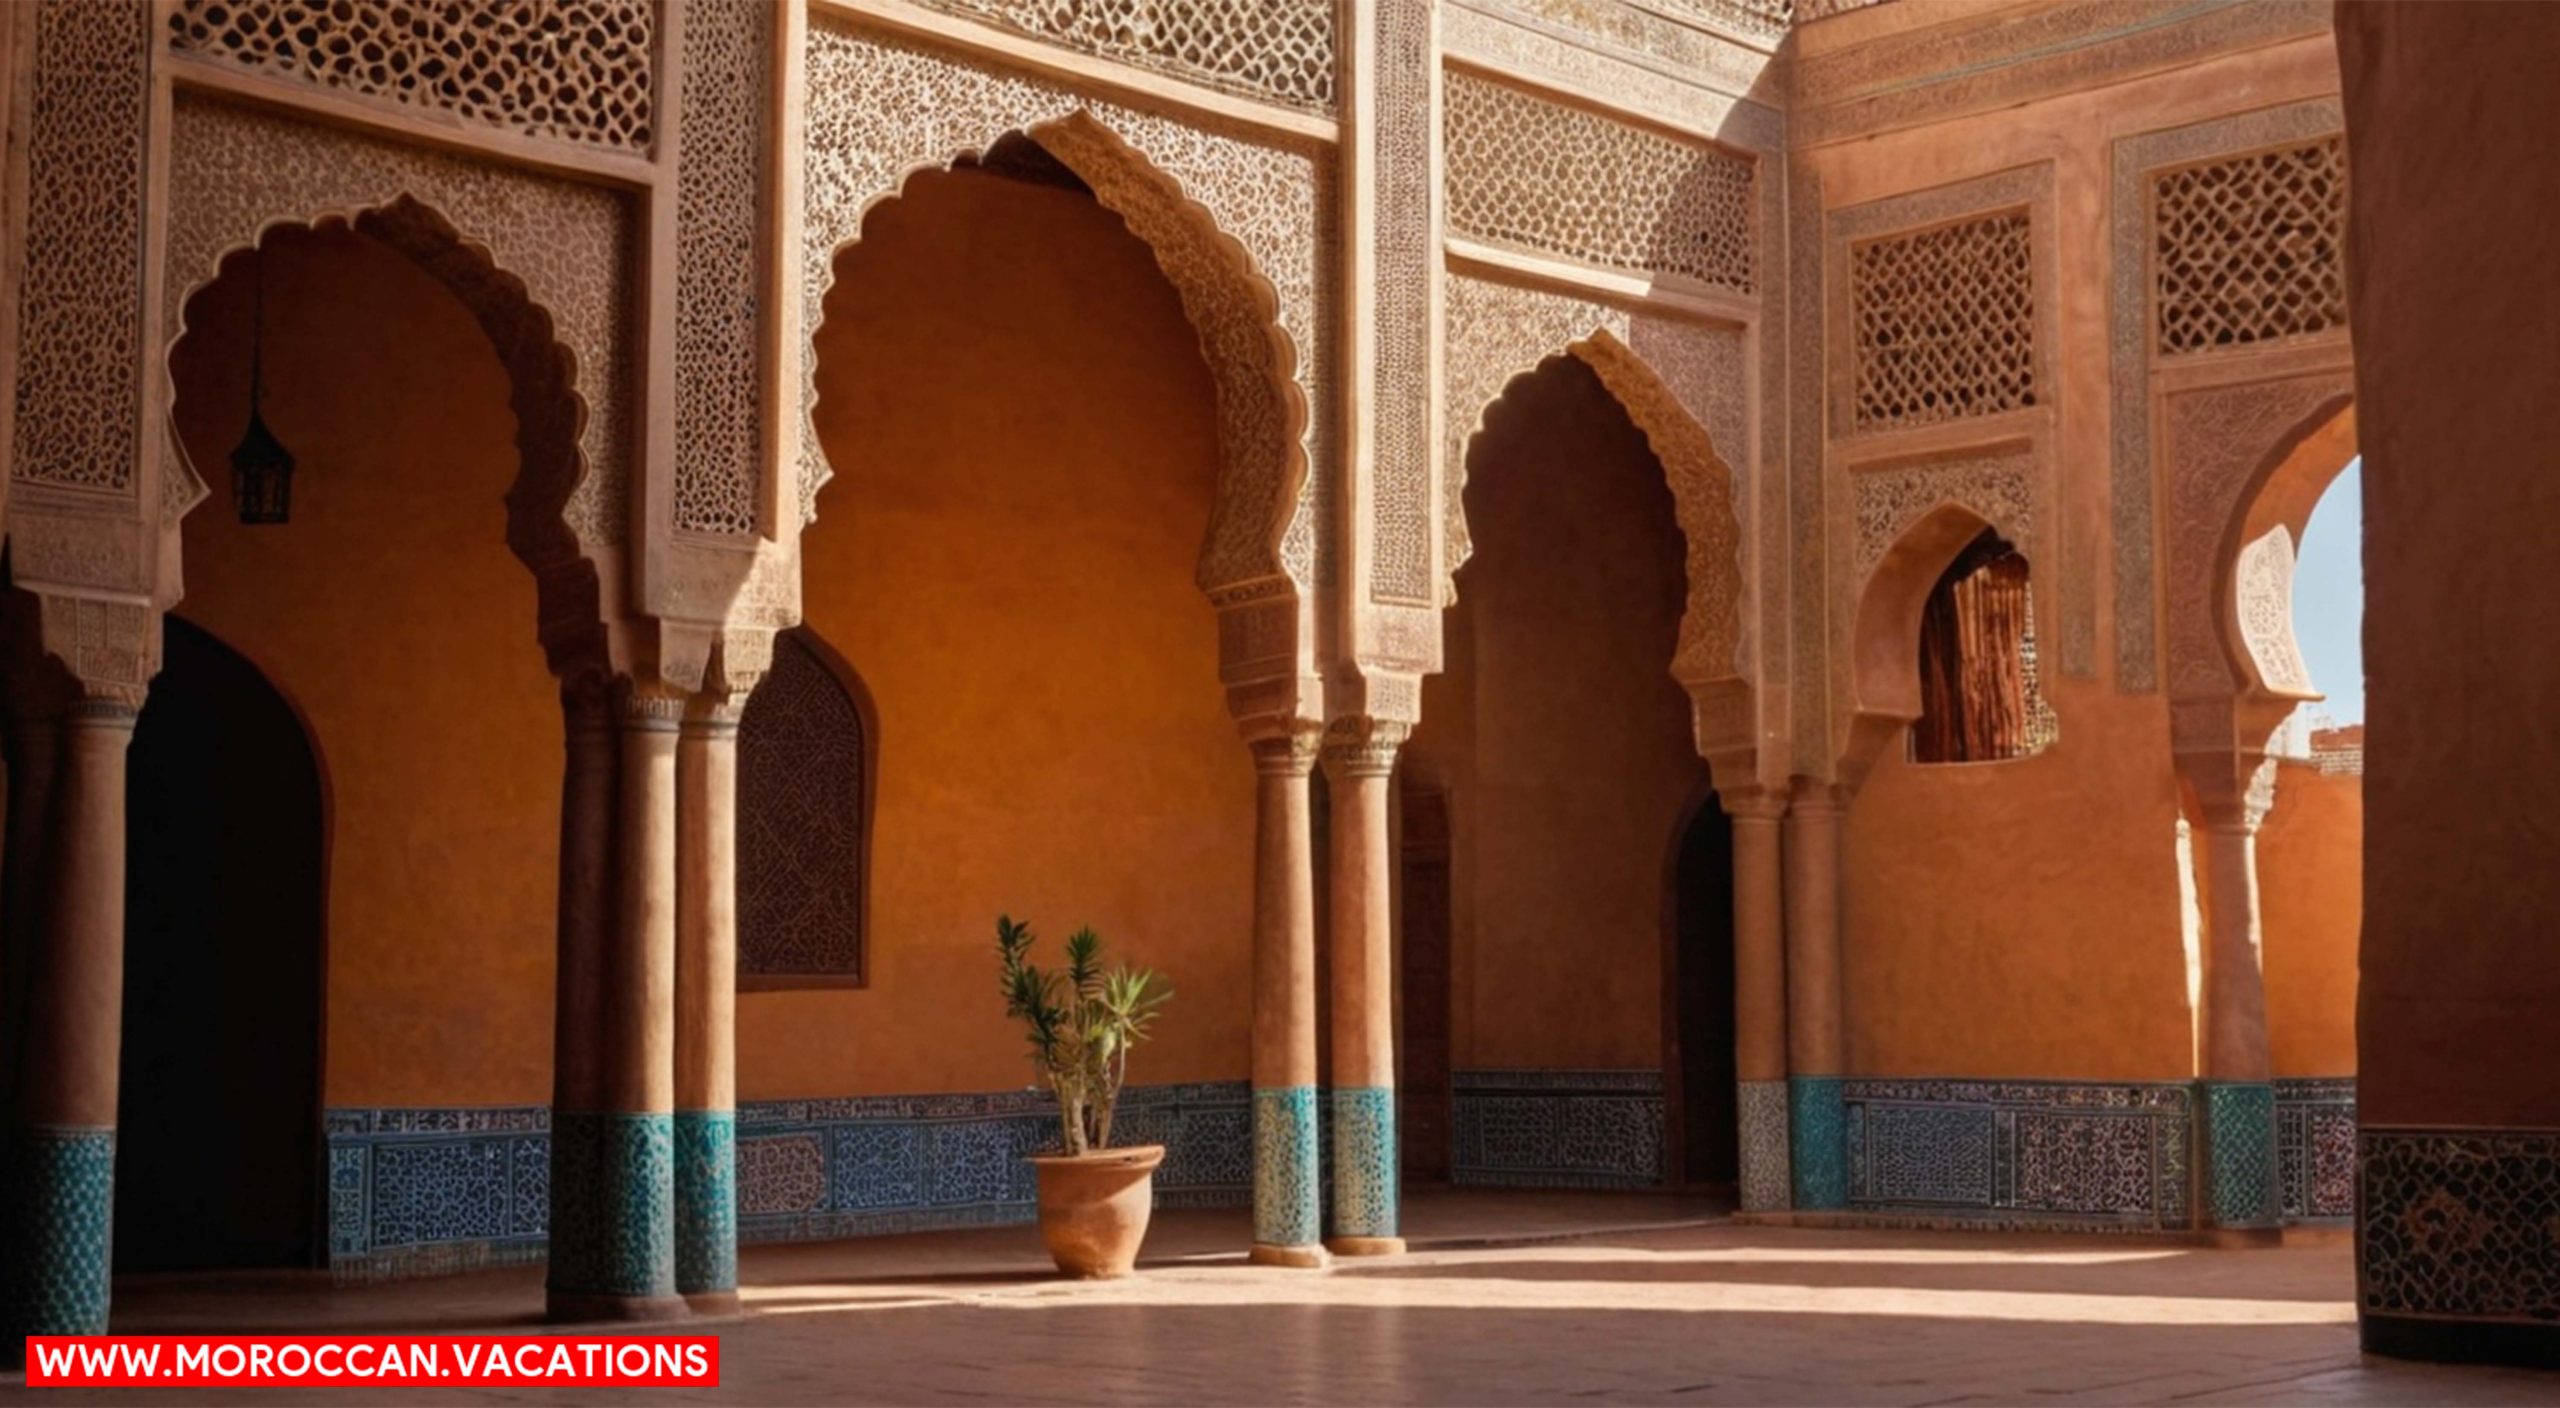 An image capturing the intricate archways of Marrakesh's architecture.